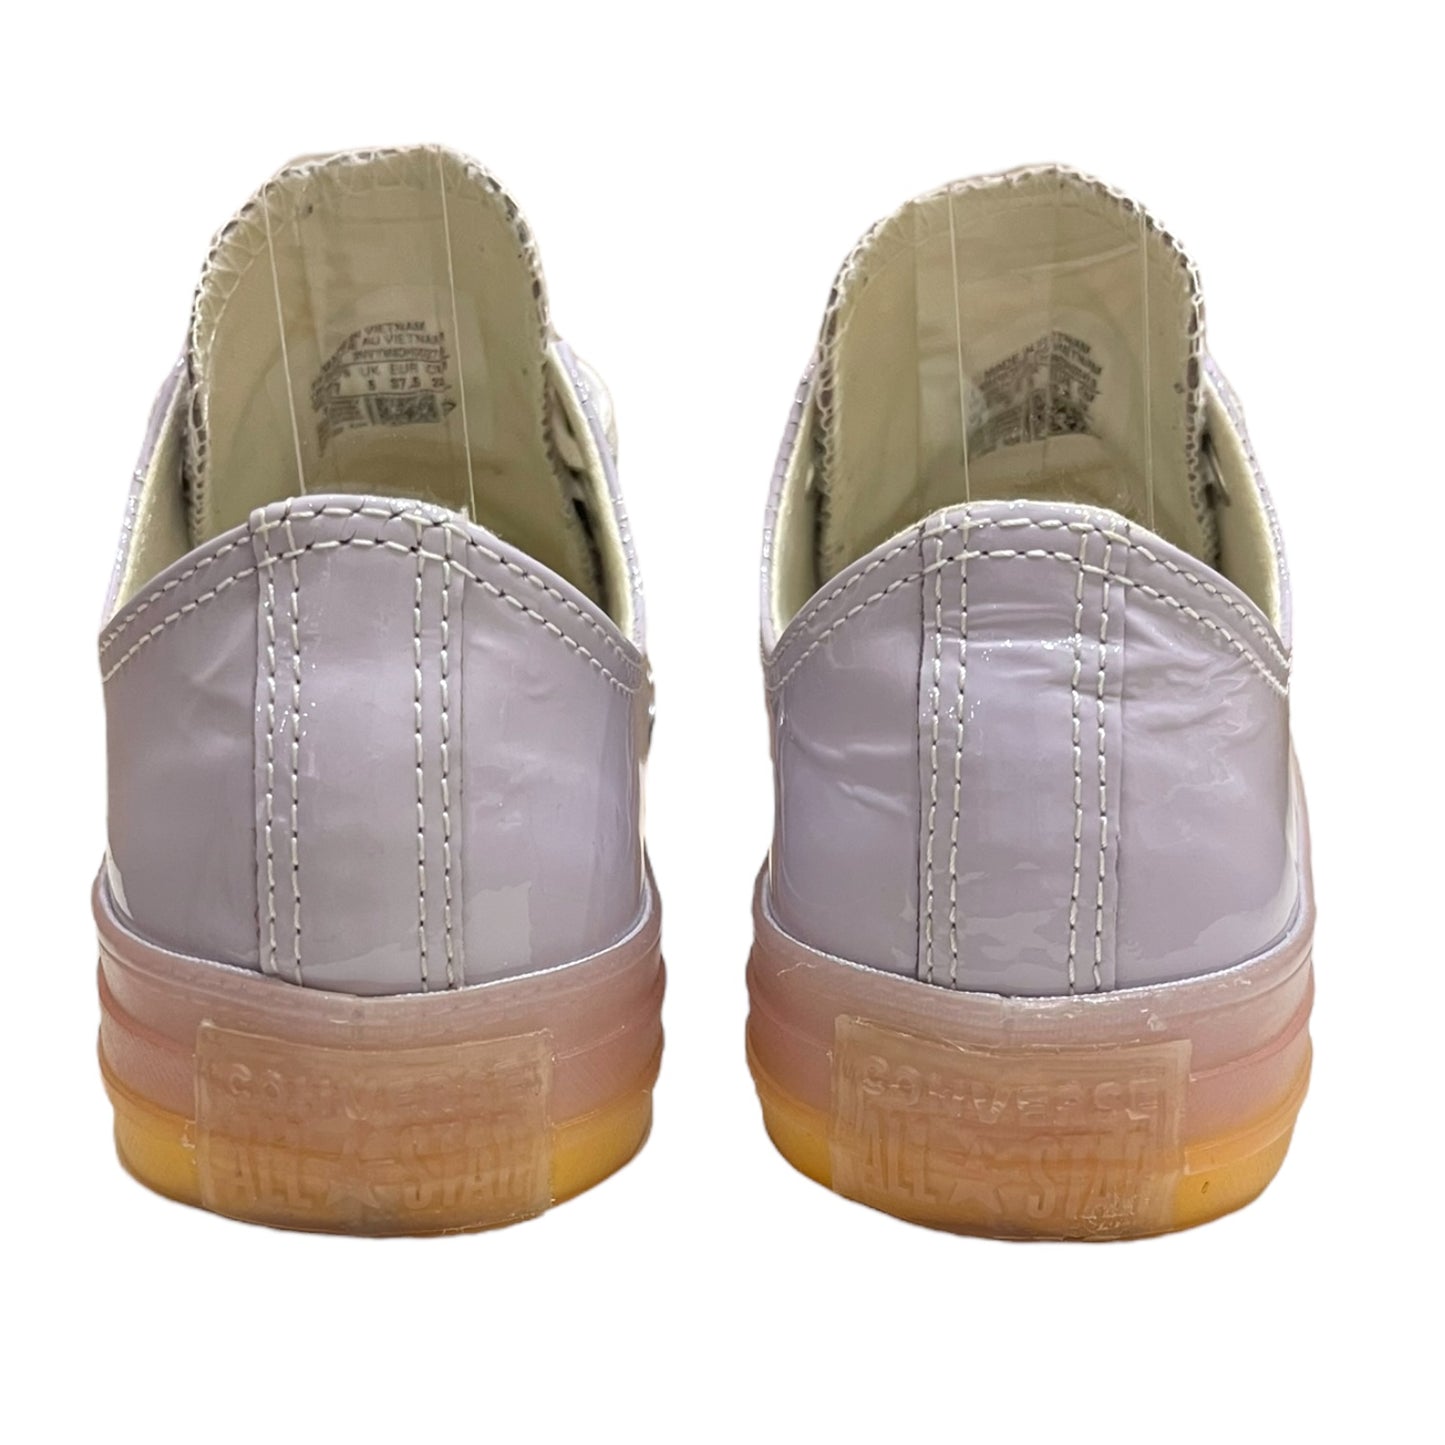 Converse Lilac Trainers - 5